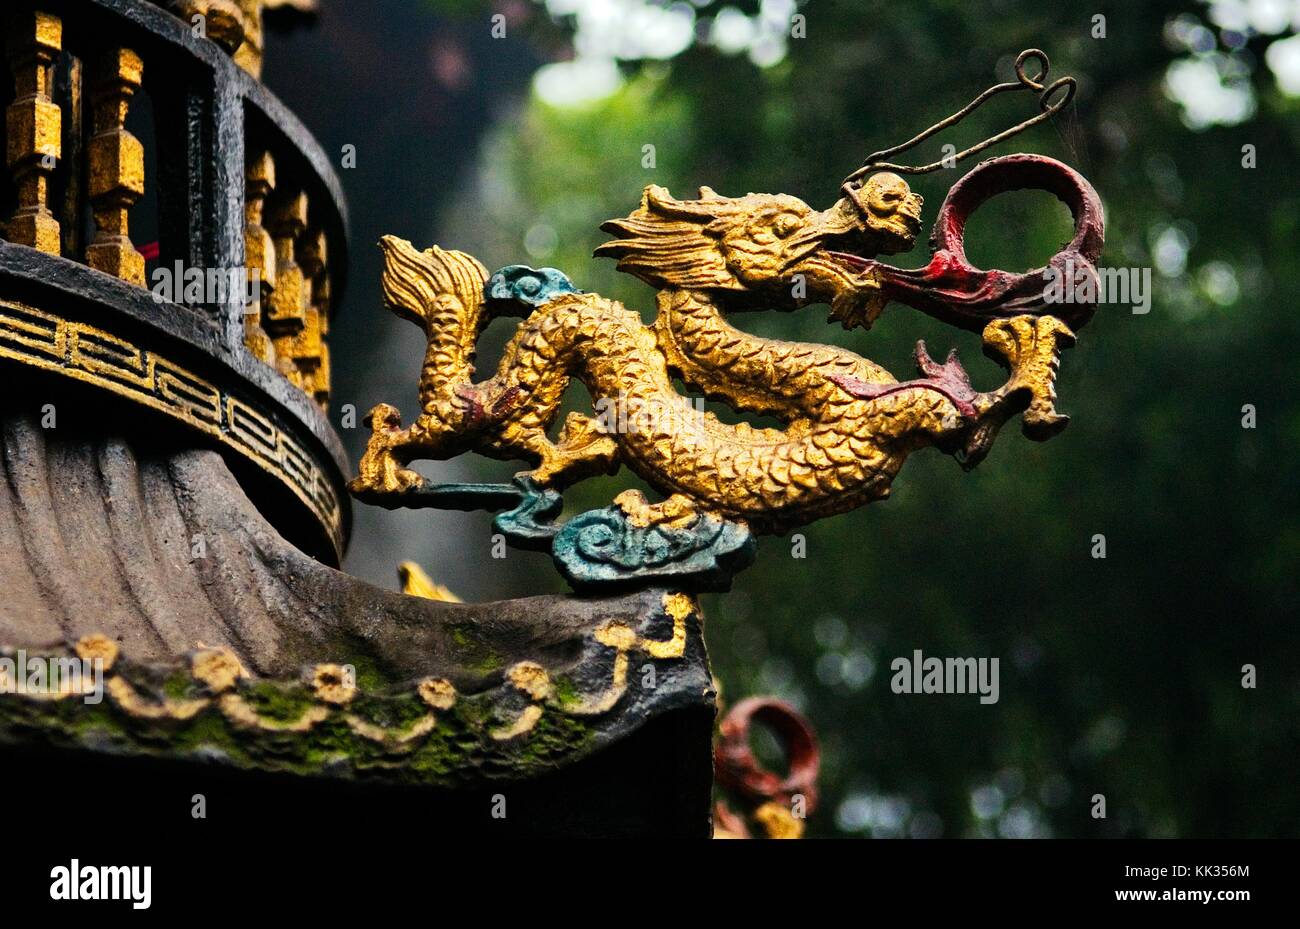 Qingyang Gong Taoist temple, also called Green Ram / Goat Temple. Tang Dynasty. Chengdu, China. Bronze dragon on incense stand Stock Photo